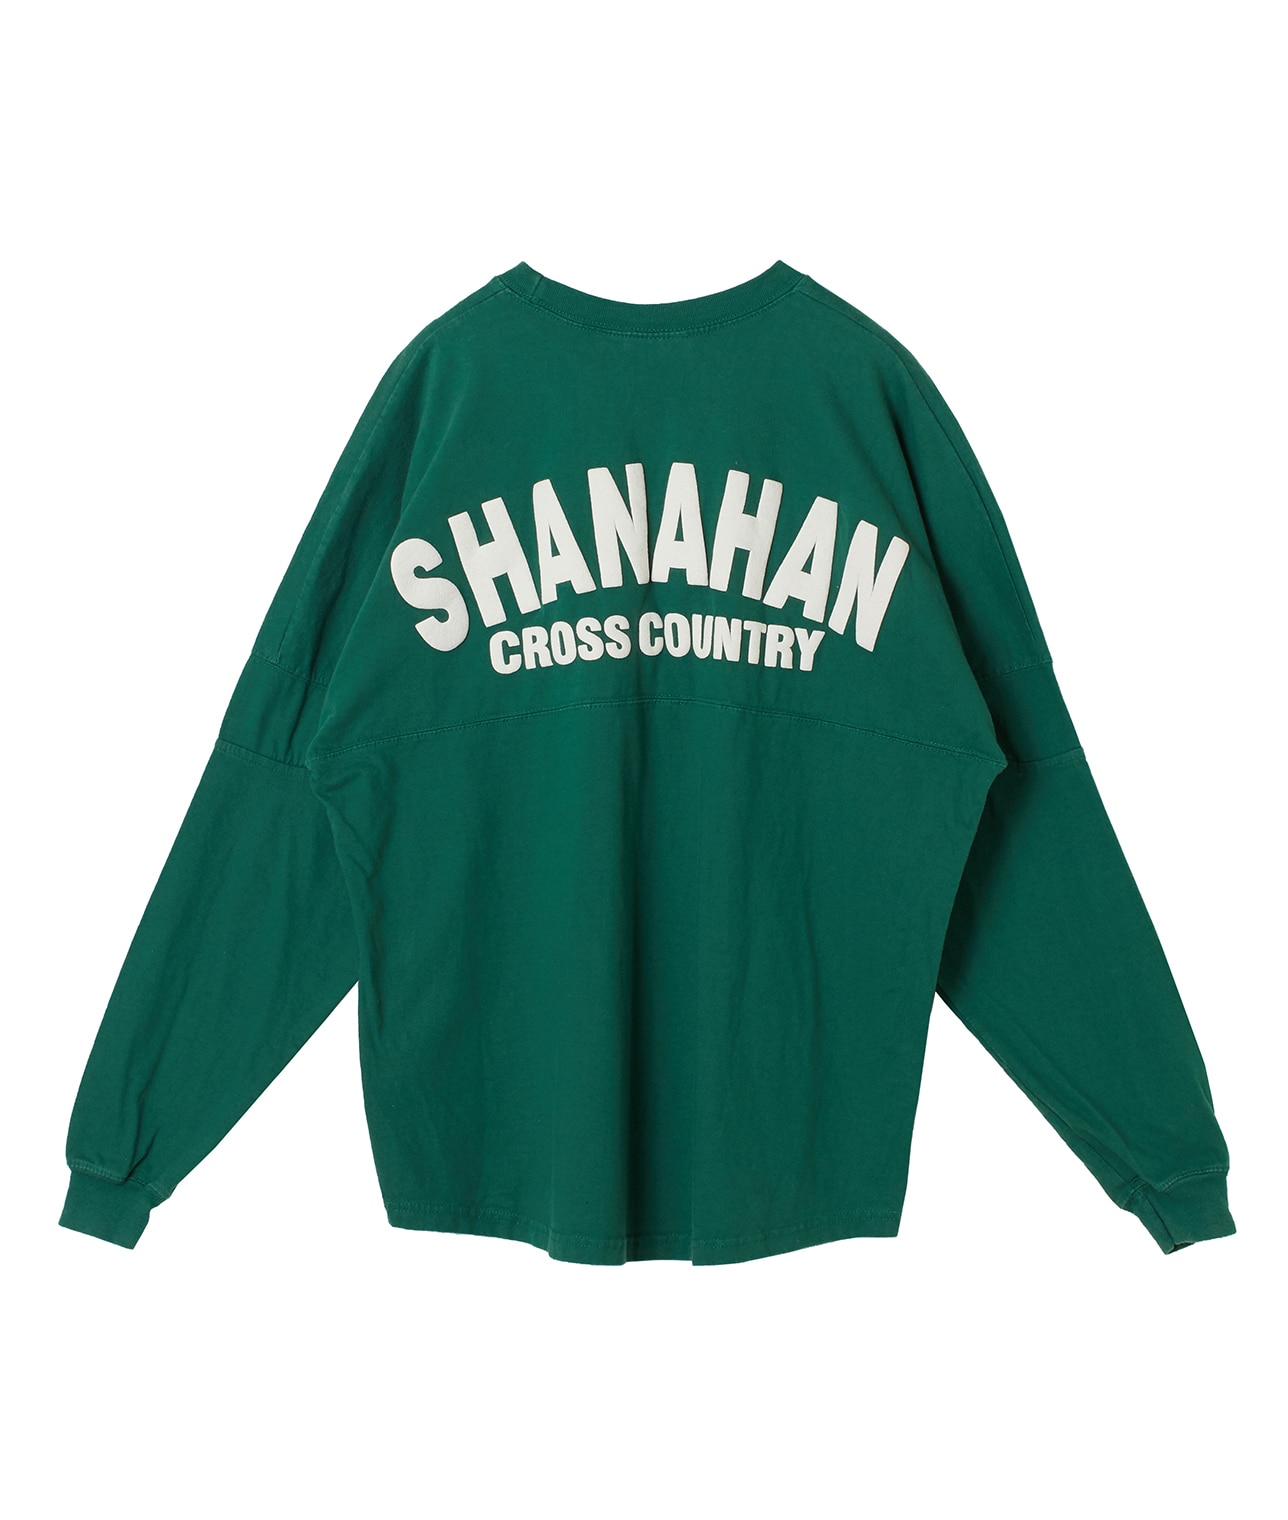 USED/SHANAHAN CROSS COUNTRY/バックプリントロングTシャツ 詳細画像 GREEN 2